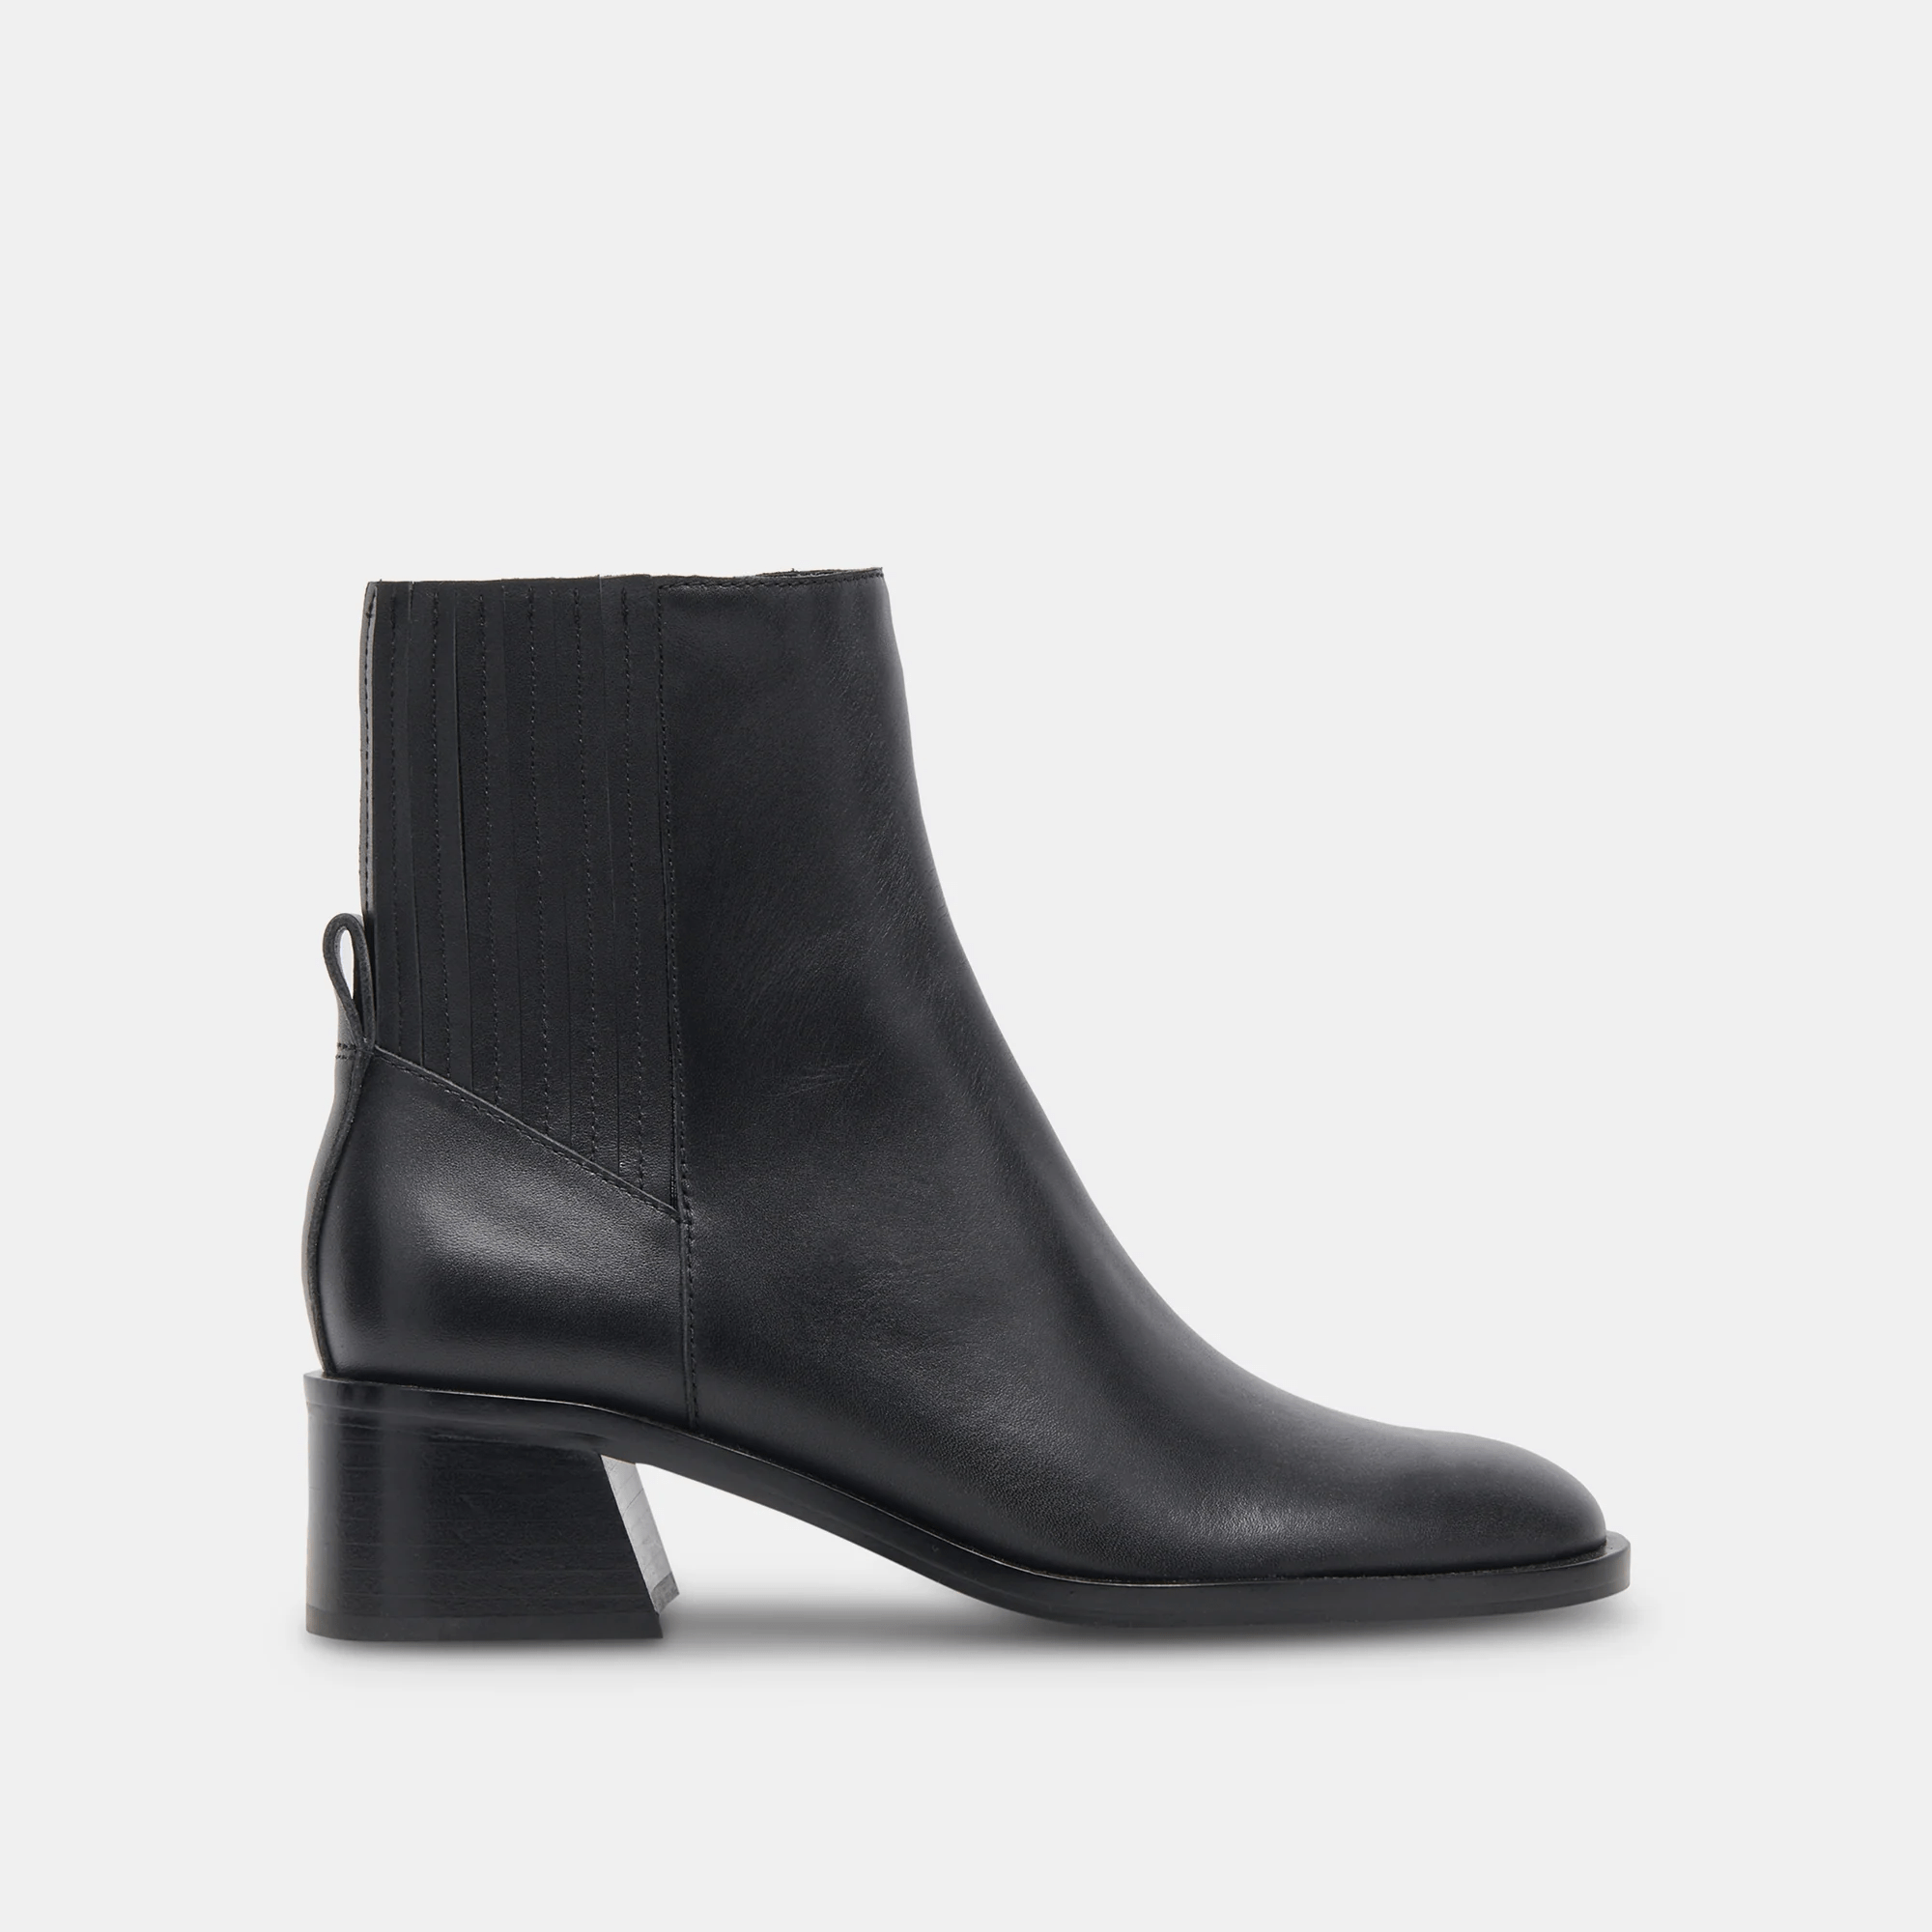 Linny H2O Black Leather Bootie with All Season Protection -Dolce Vita Footwear, Inc.- Ruby Jane-